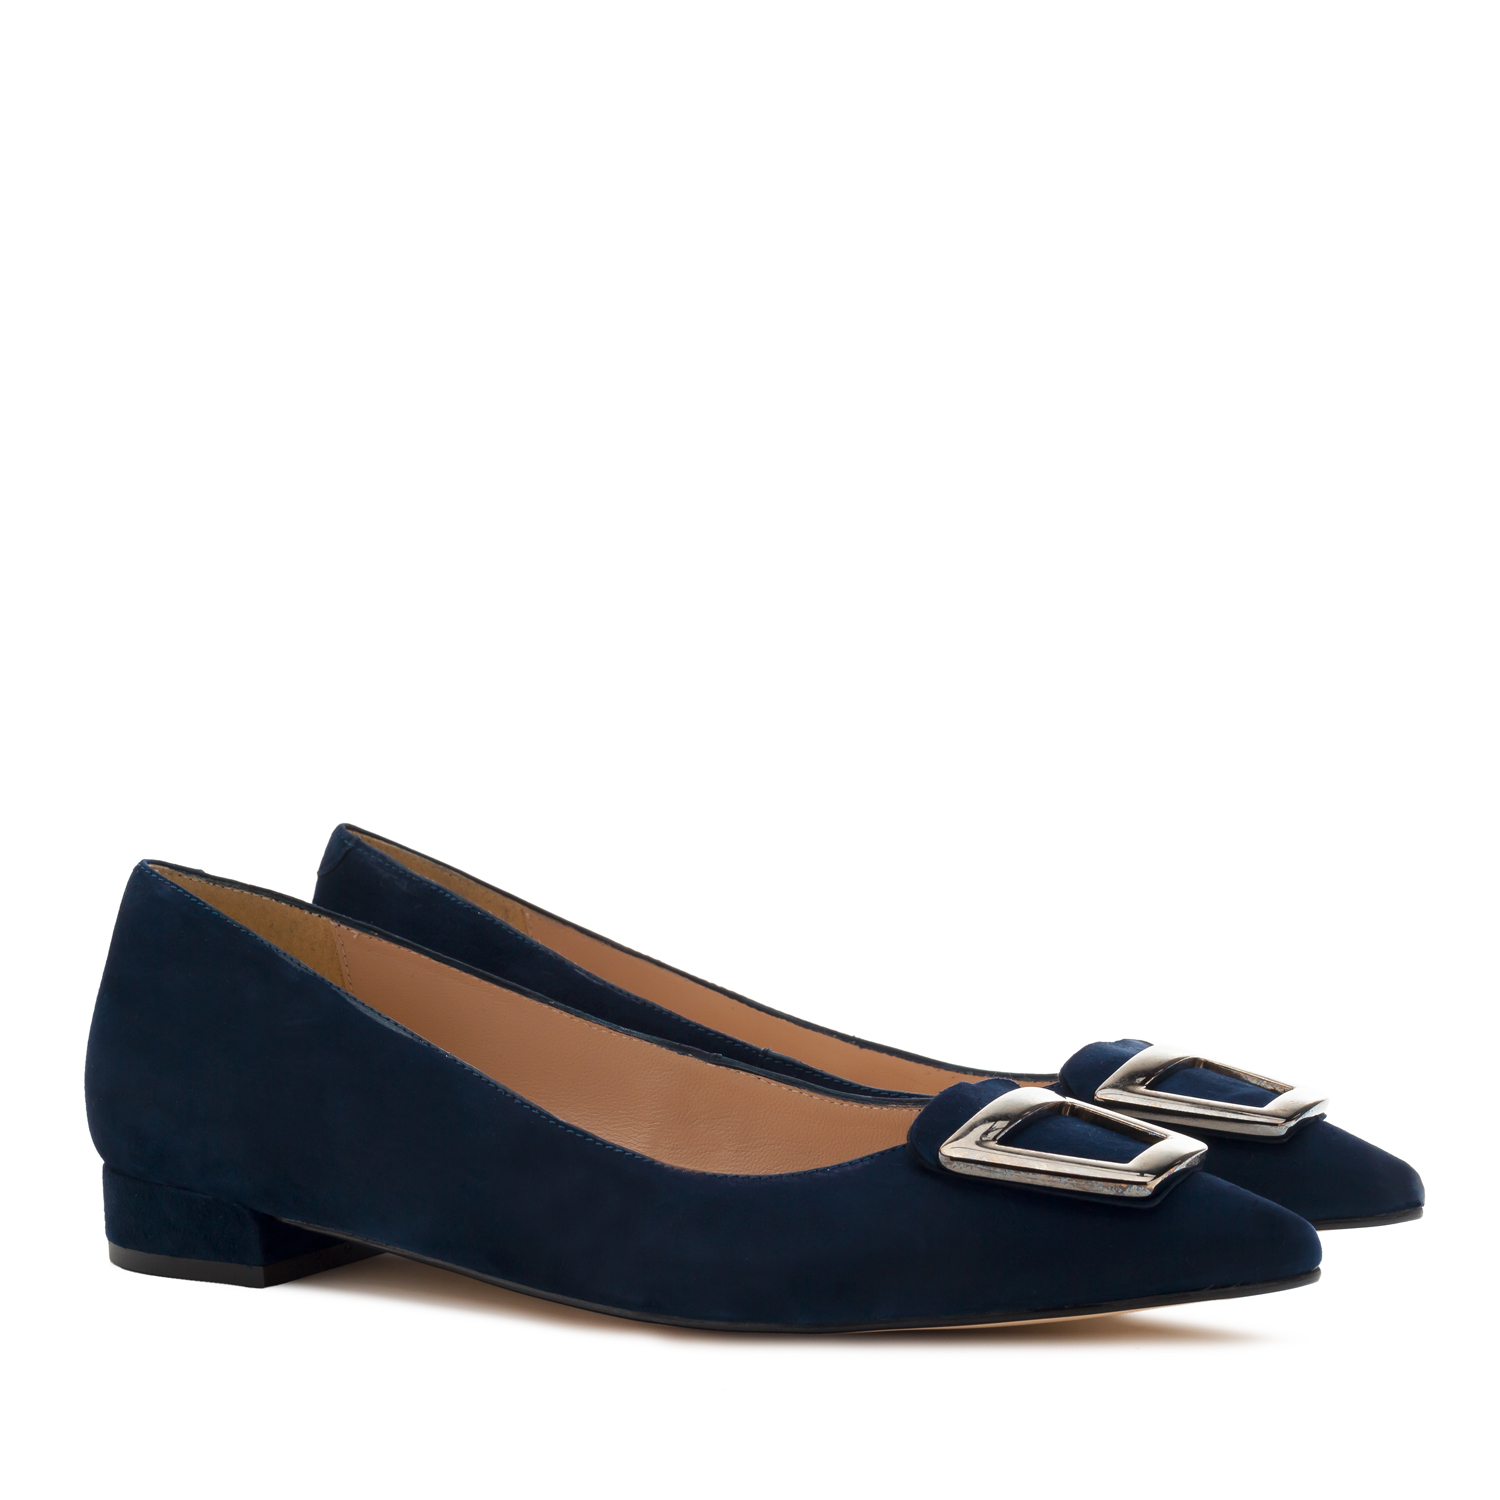 Trim Loafers in Navy Suede Leather 